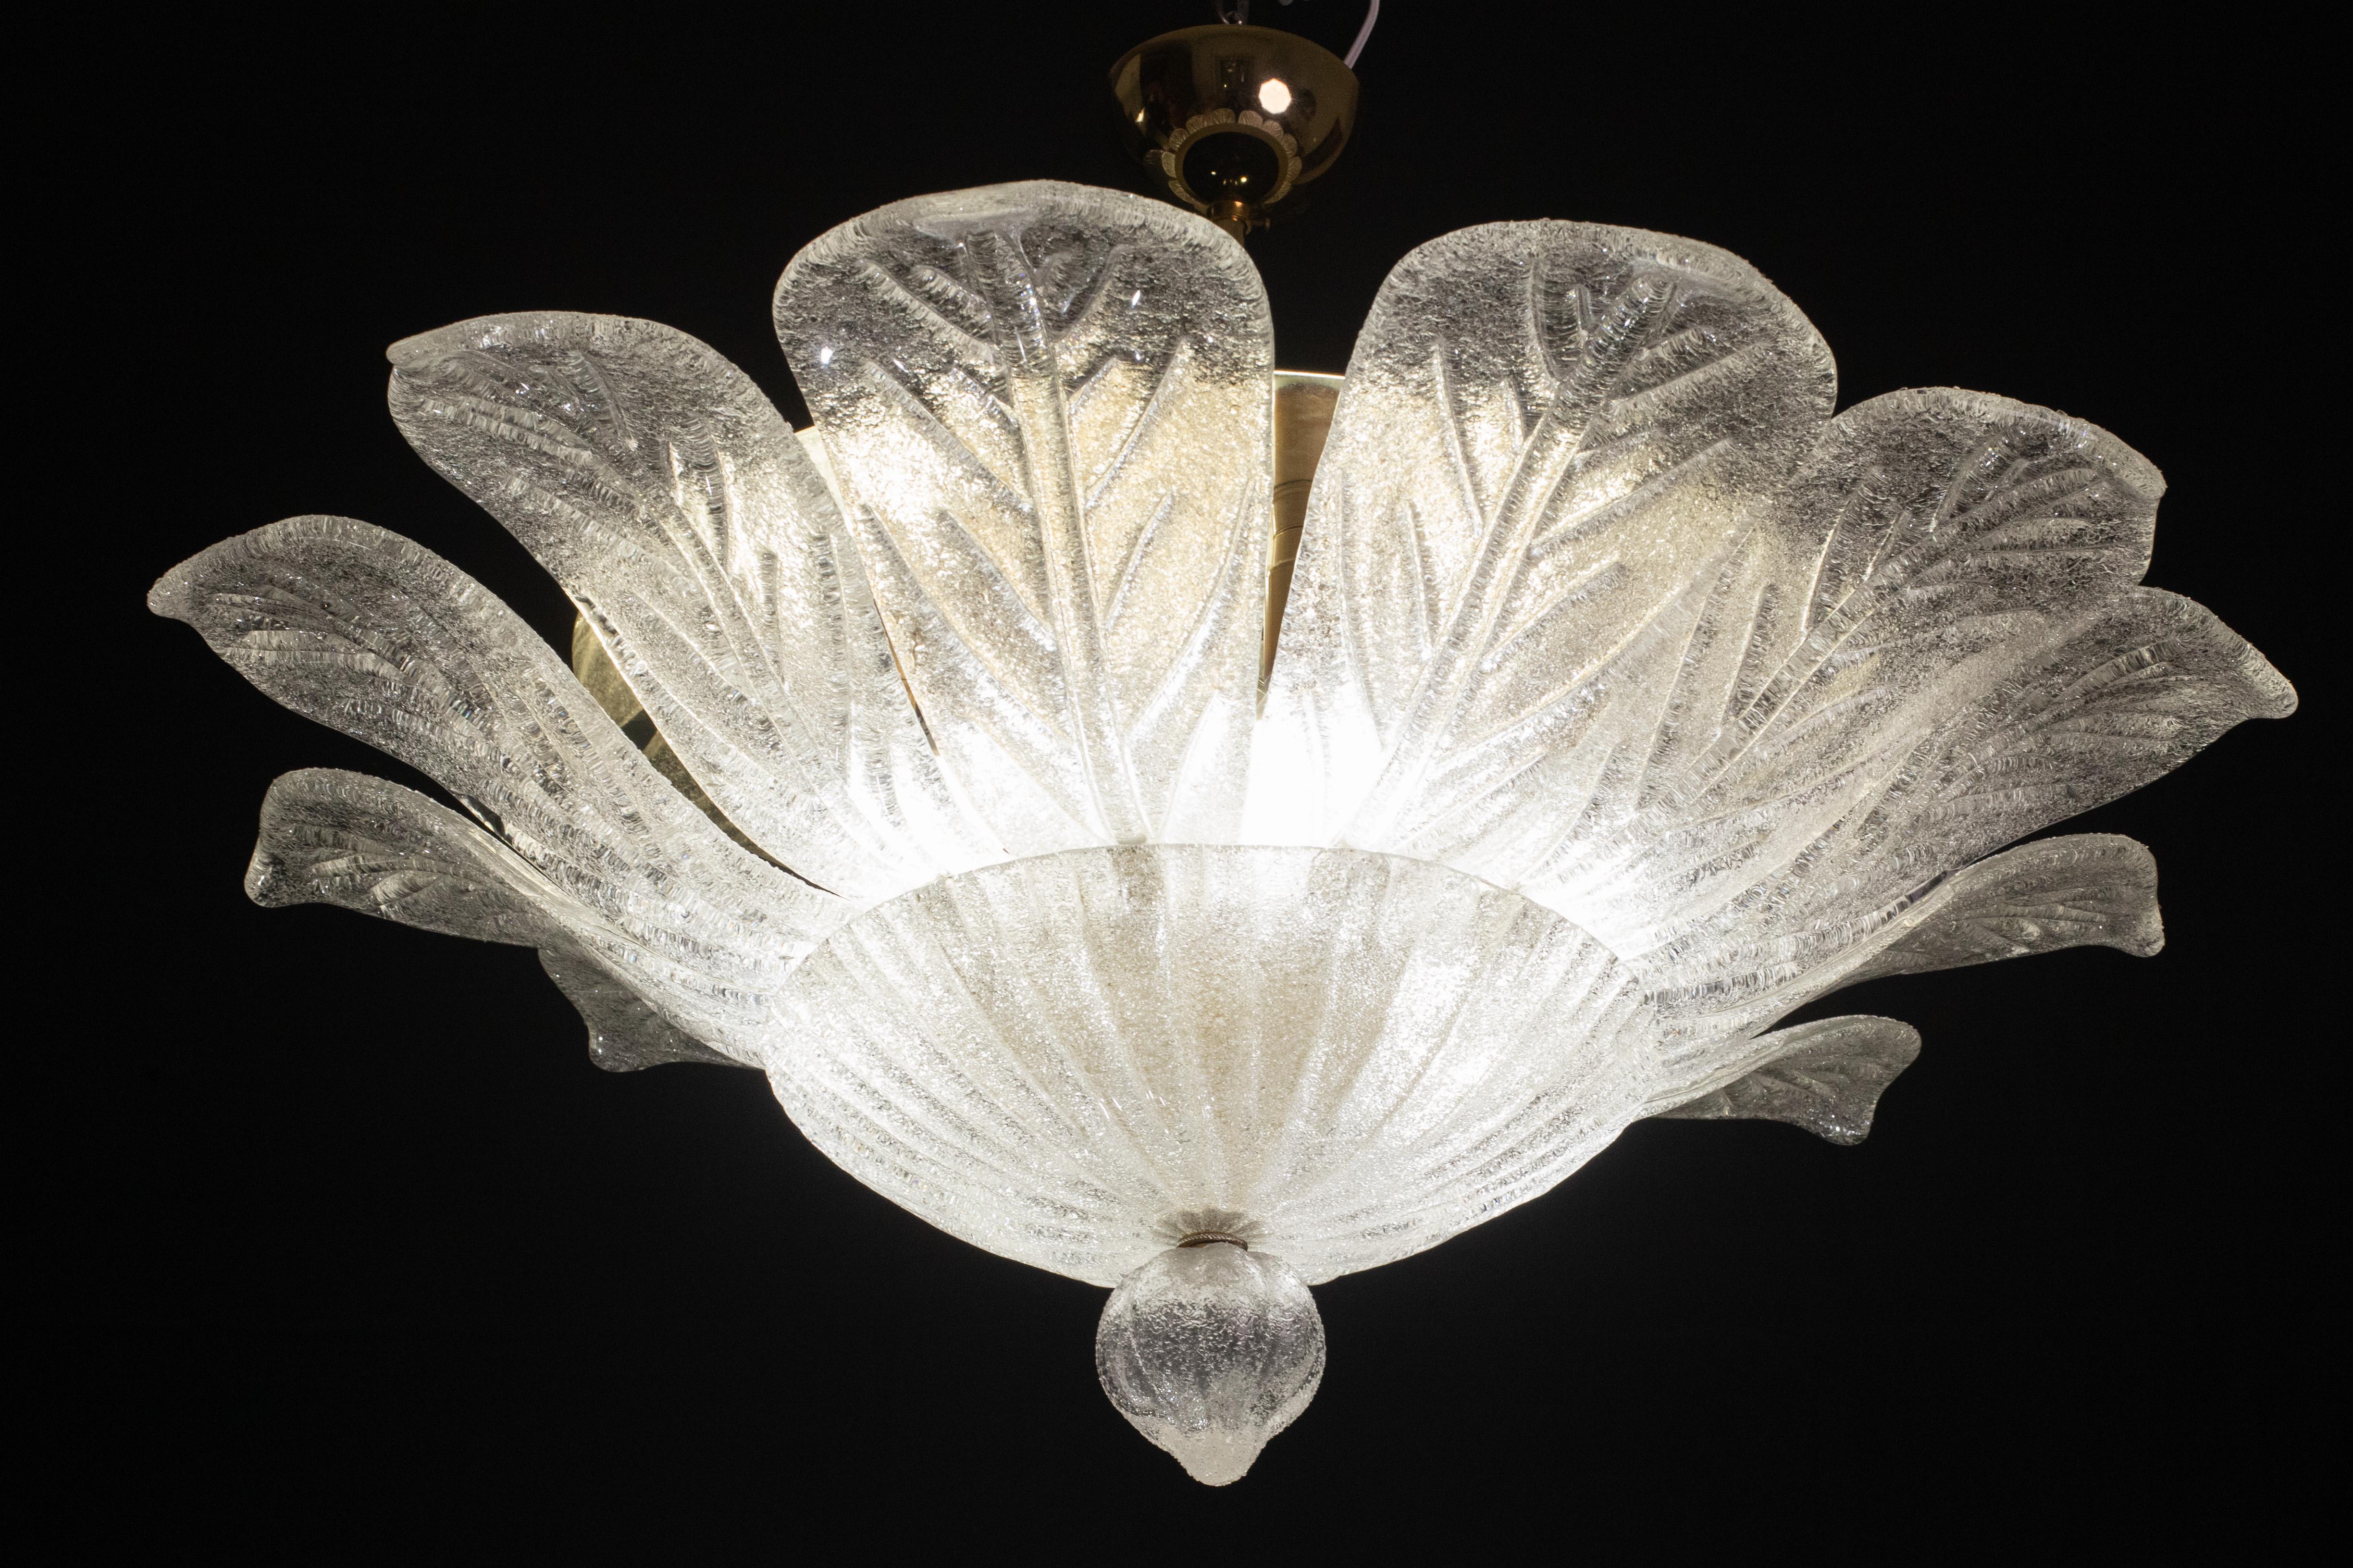 Splendid Murano glass ceiling lamp.

Period: circa 1970.

The ceiling light currently mounts a rod, with the rod it measures 60 centimeters in height, without the rod 35 centimeters, the rod is very easy to remove, the diameter measures 77